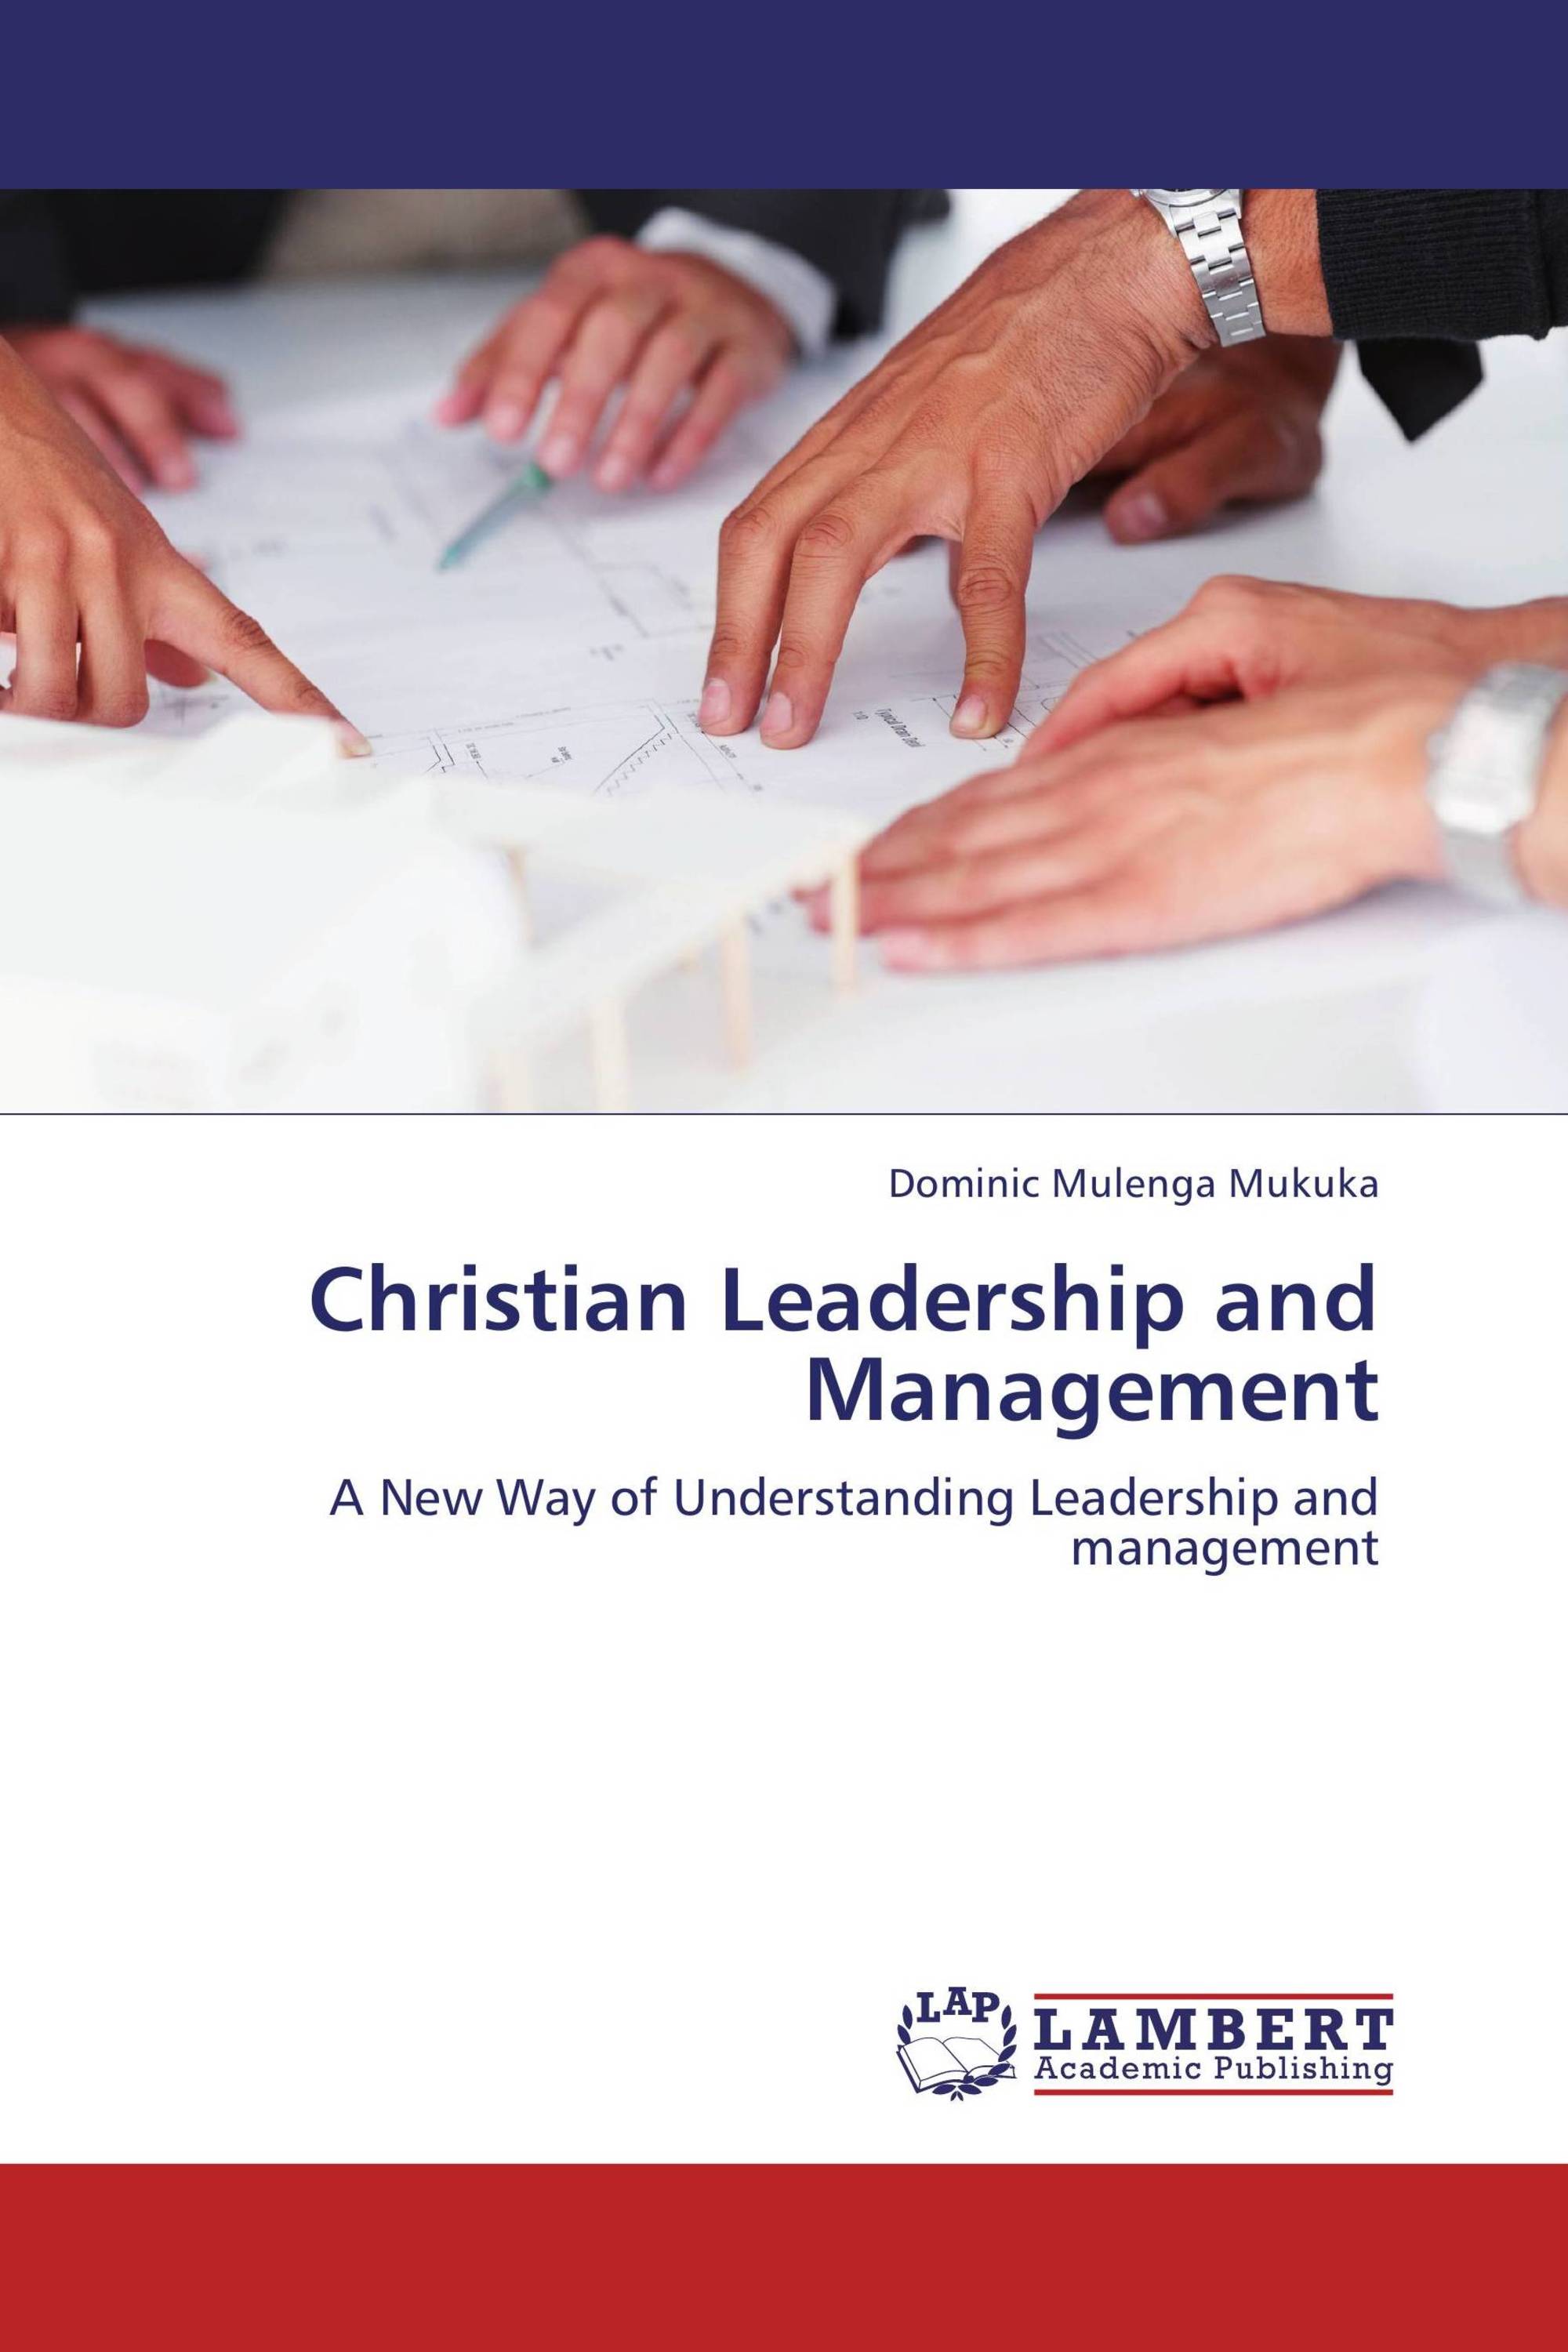 phd in christian leadership and management